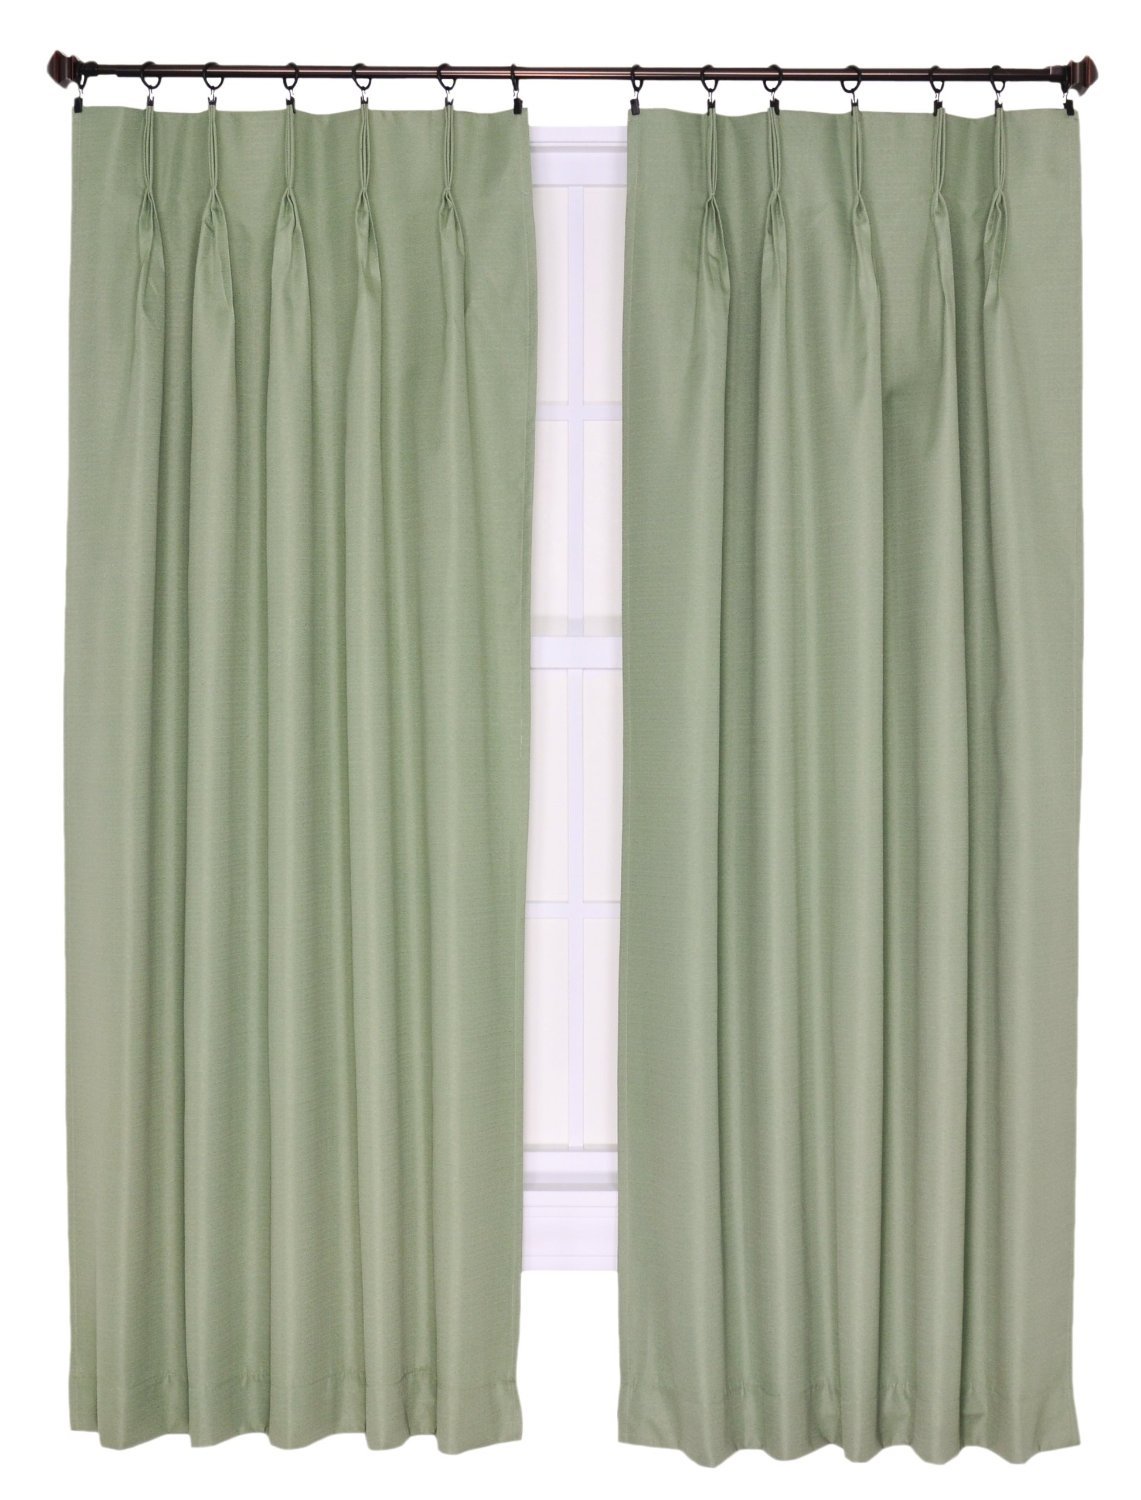 Thermal Curtains 96 Inch Long 96 Inch Bamboo Curtains